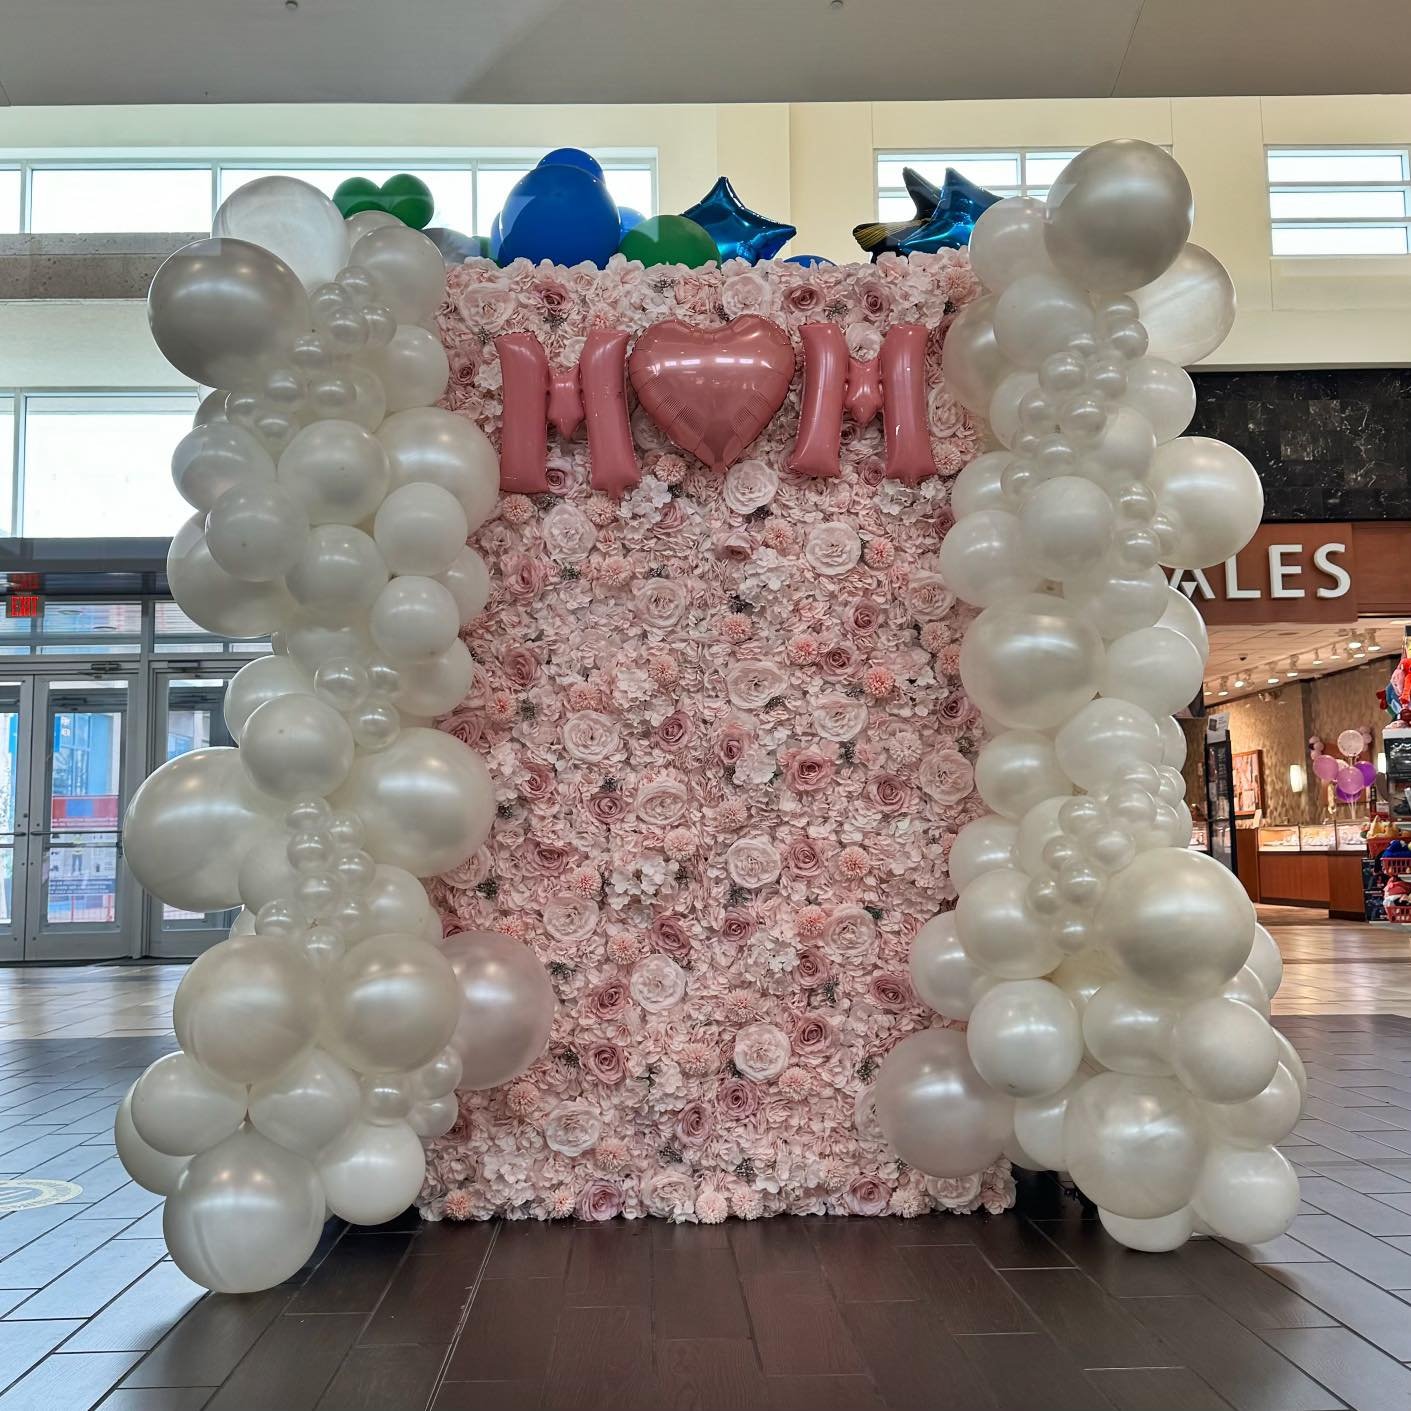 Celebrate M🤍M at La Palmera this weekend with shopping and dinner! And be sure to snap a pic at our balloon wall in Center Court to capture the memory. 📸💐 #happymothersday